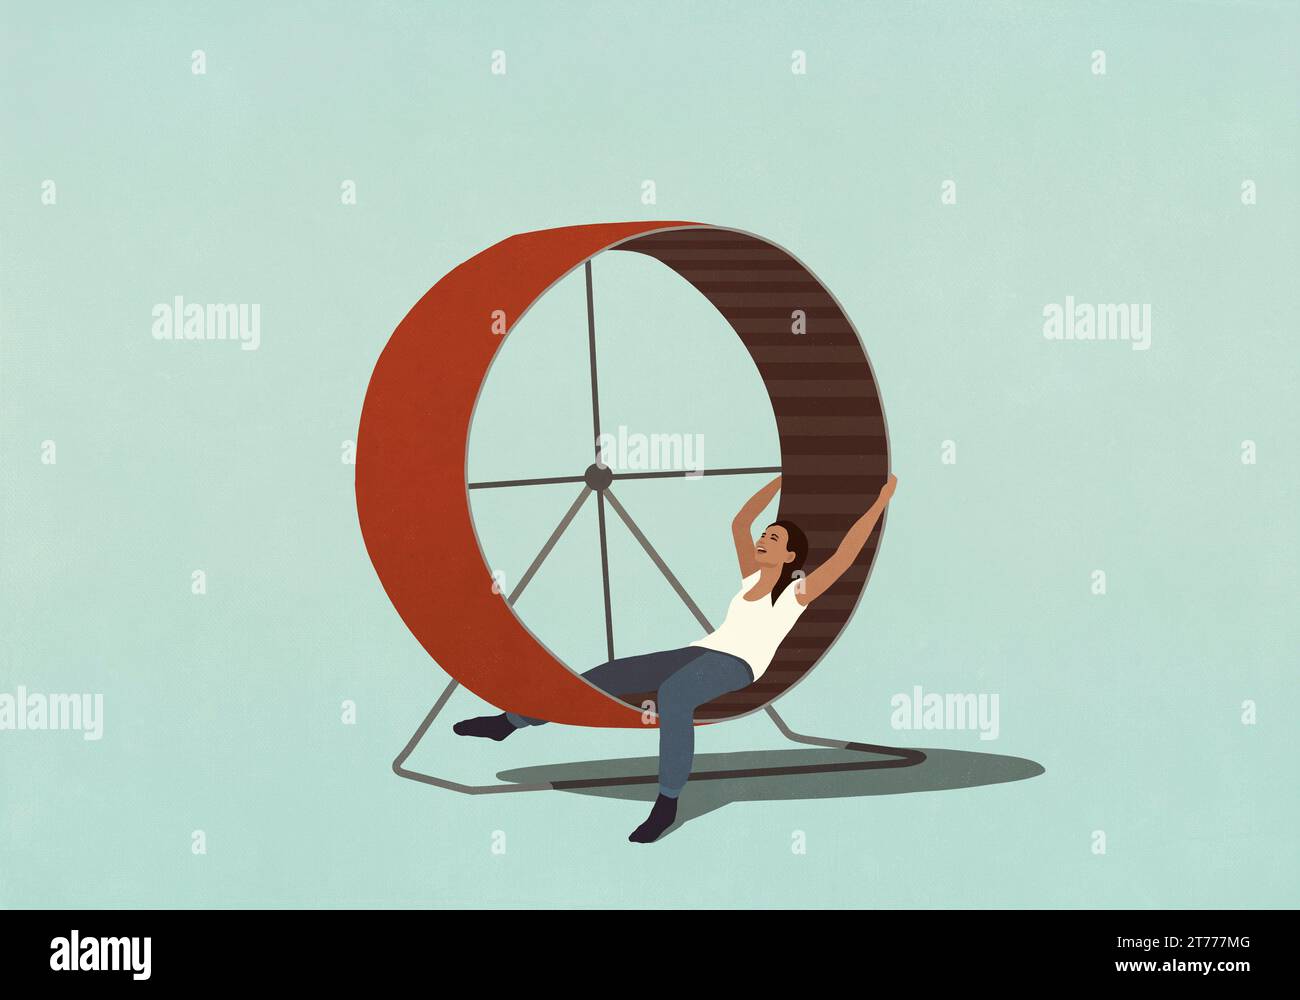 Tired woman laying inside hamster wheel Stock Photo